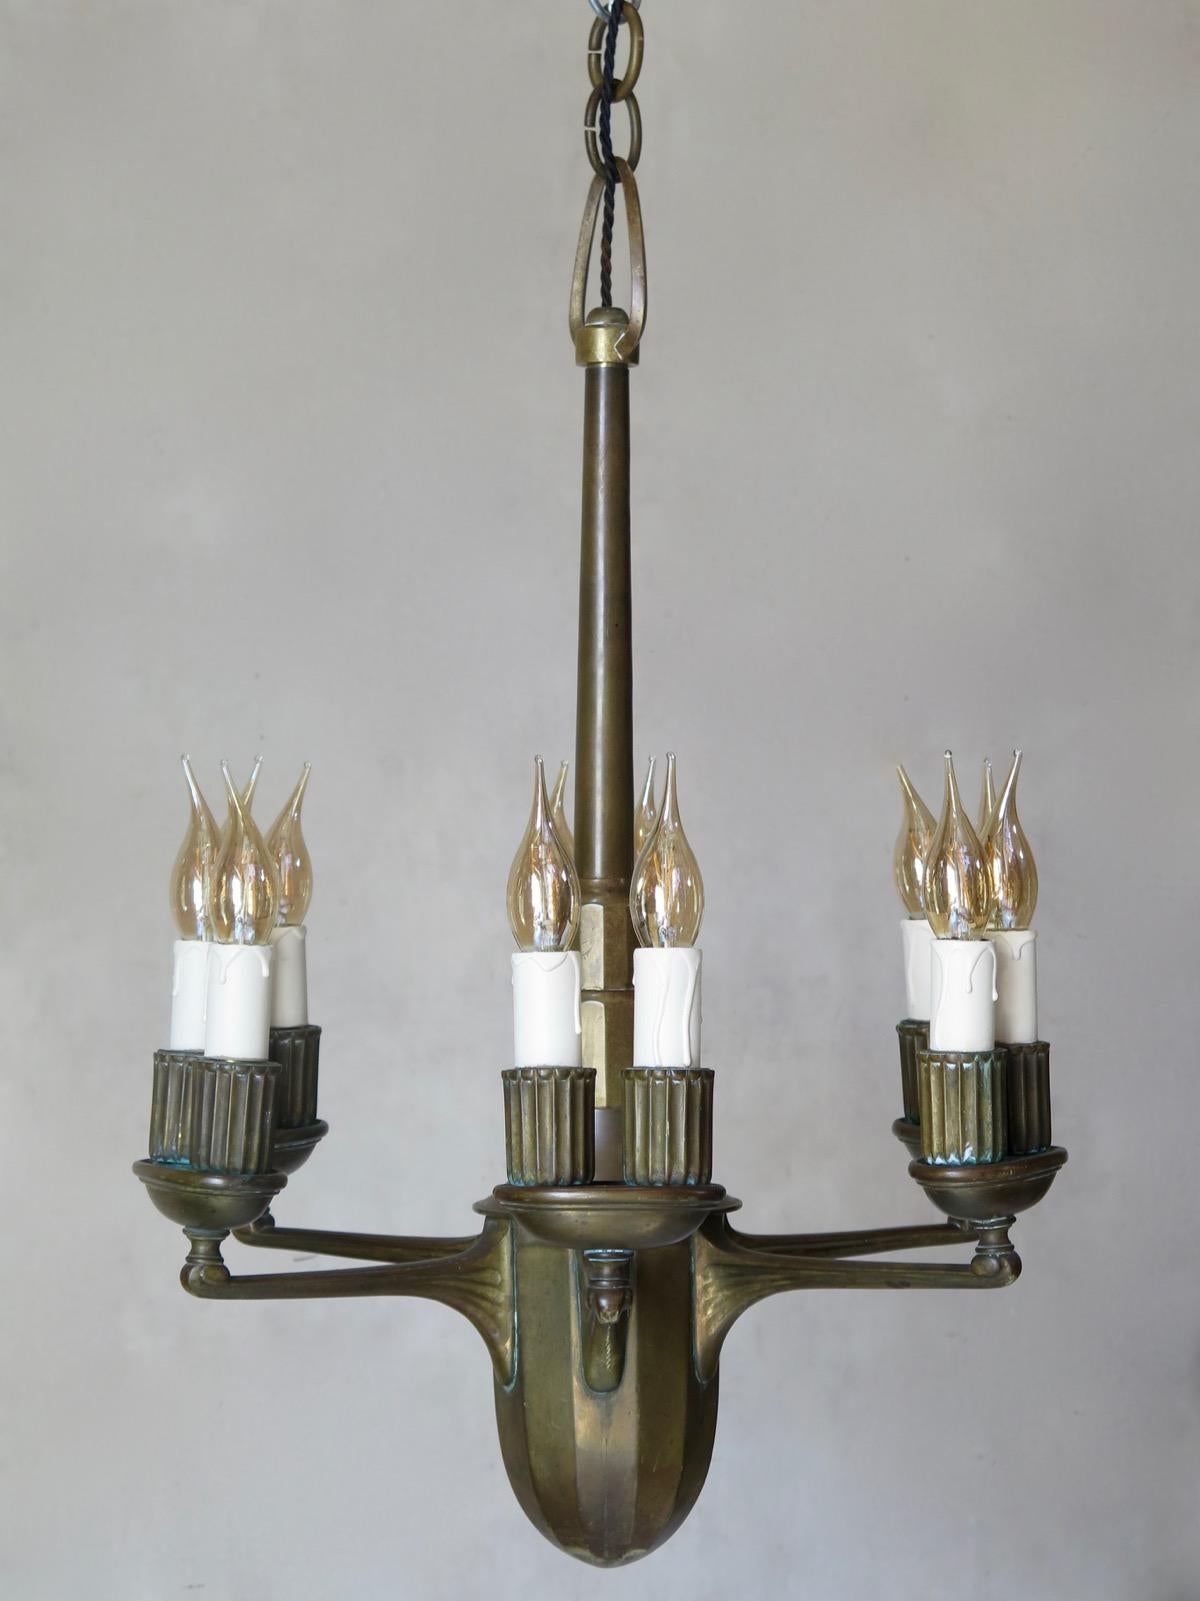 Elegant and heavy six-arm and twelve-light solid bronze chandelier with lovely lines, drawing on both Art Nouveau and Art Deco influences. Each arm supports an ovoid cup with two ridged light holders. Stepped stem. Ovoid stem base. Newly rewired.